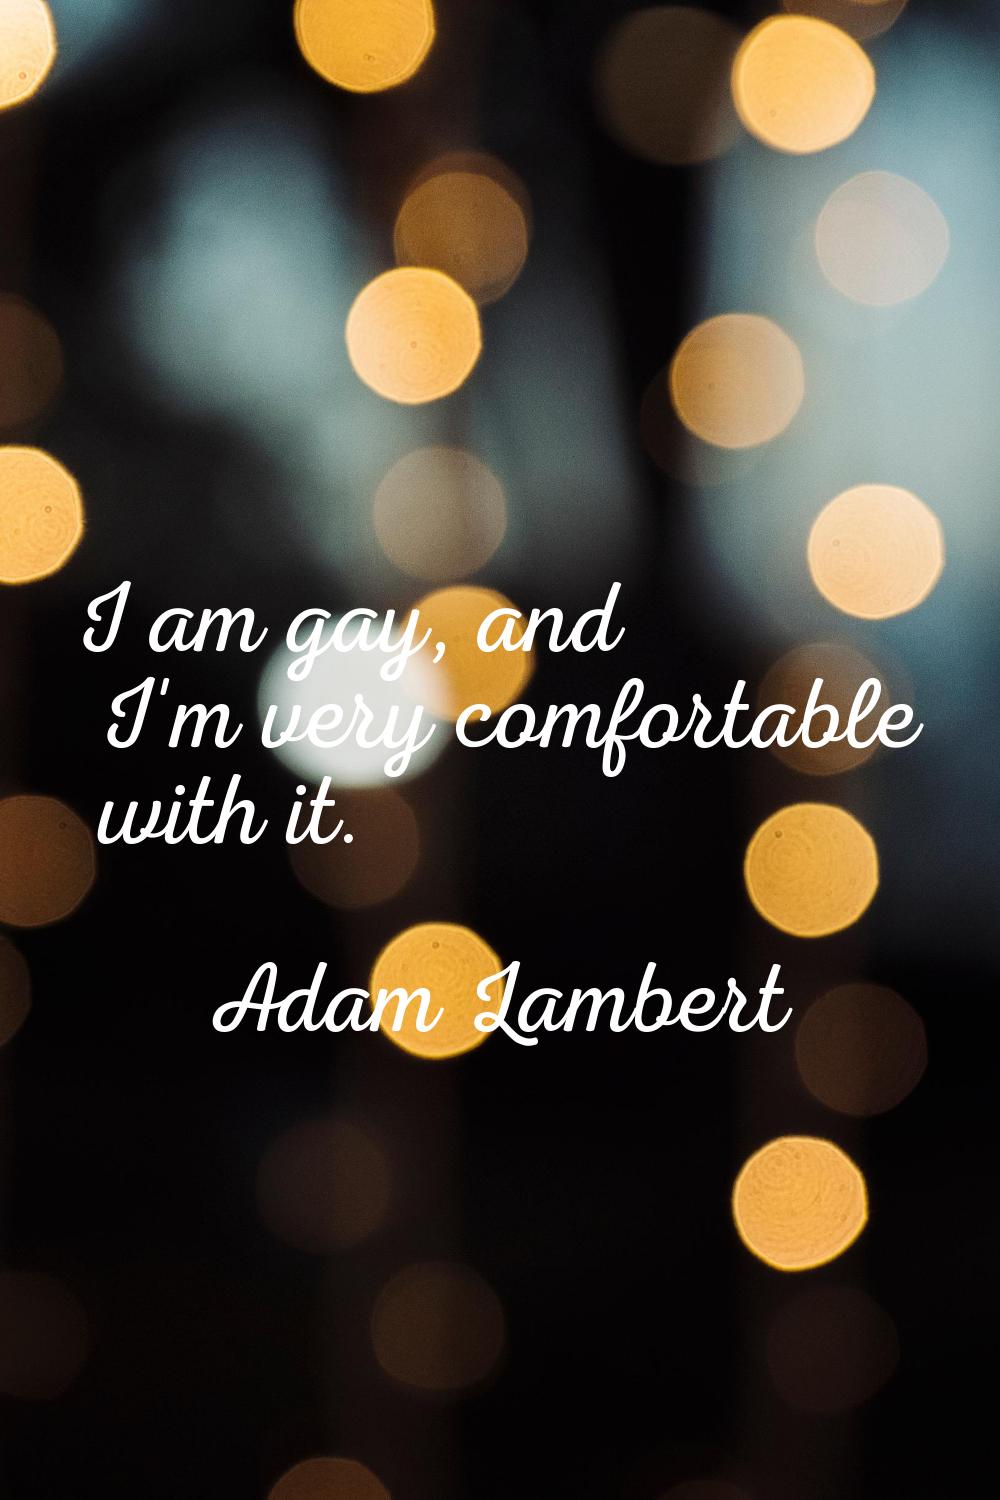 I am gay, and I'm very comfortable with it.